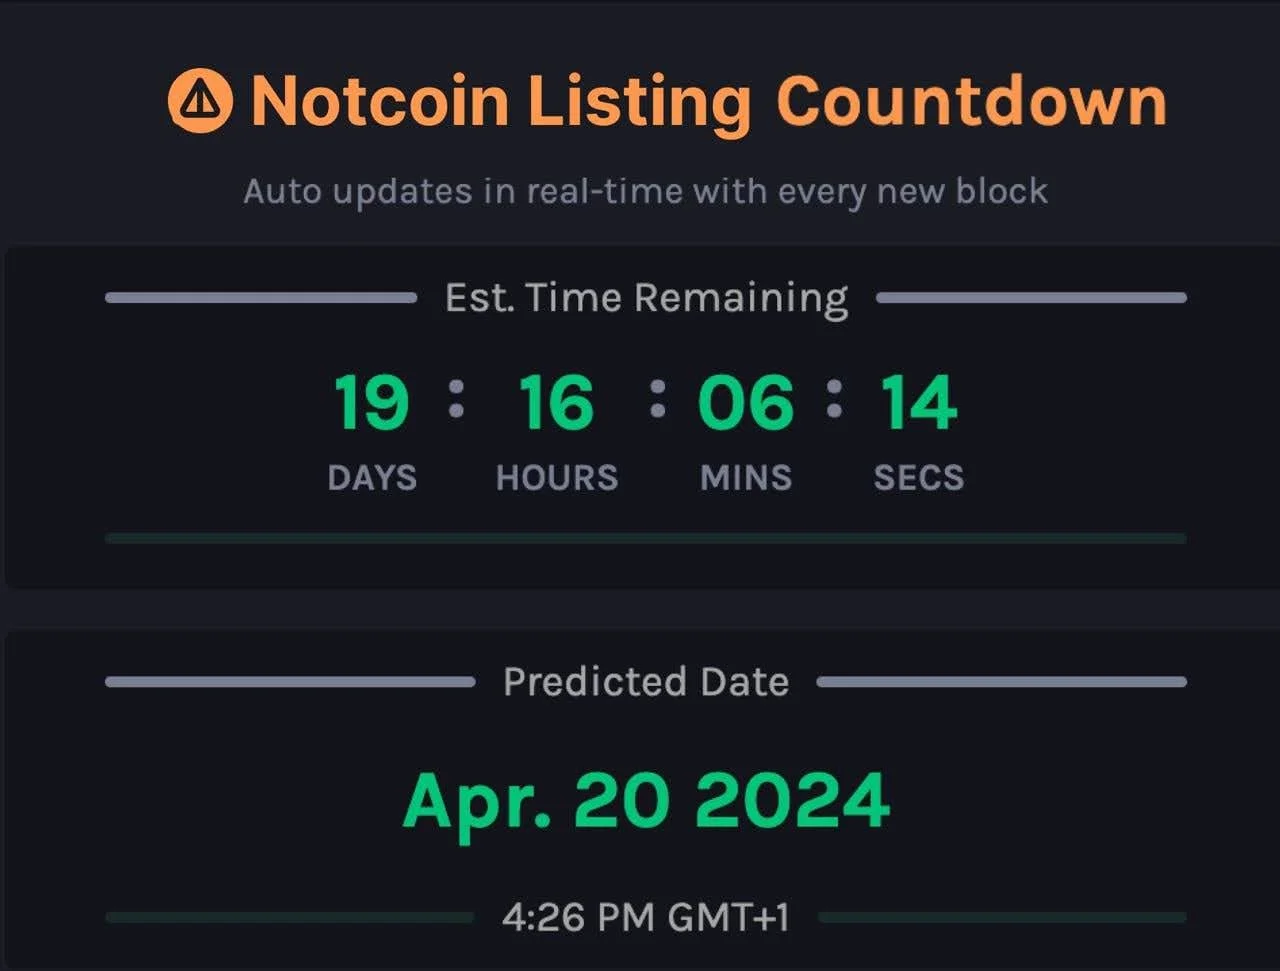 Notcoin Listing Countdown